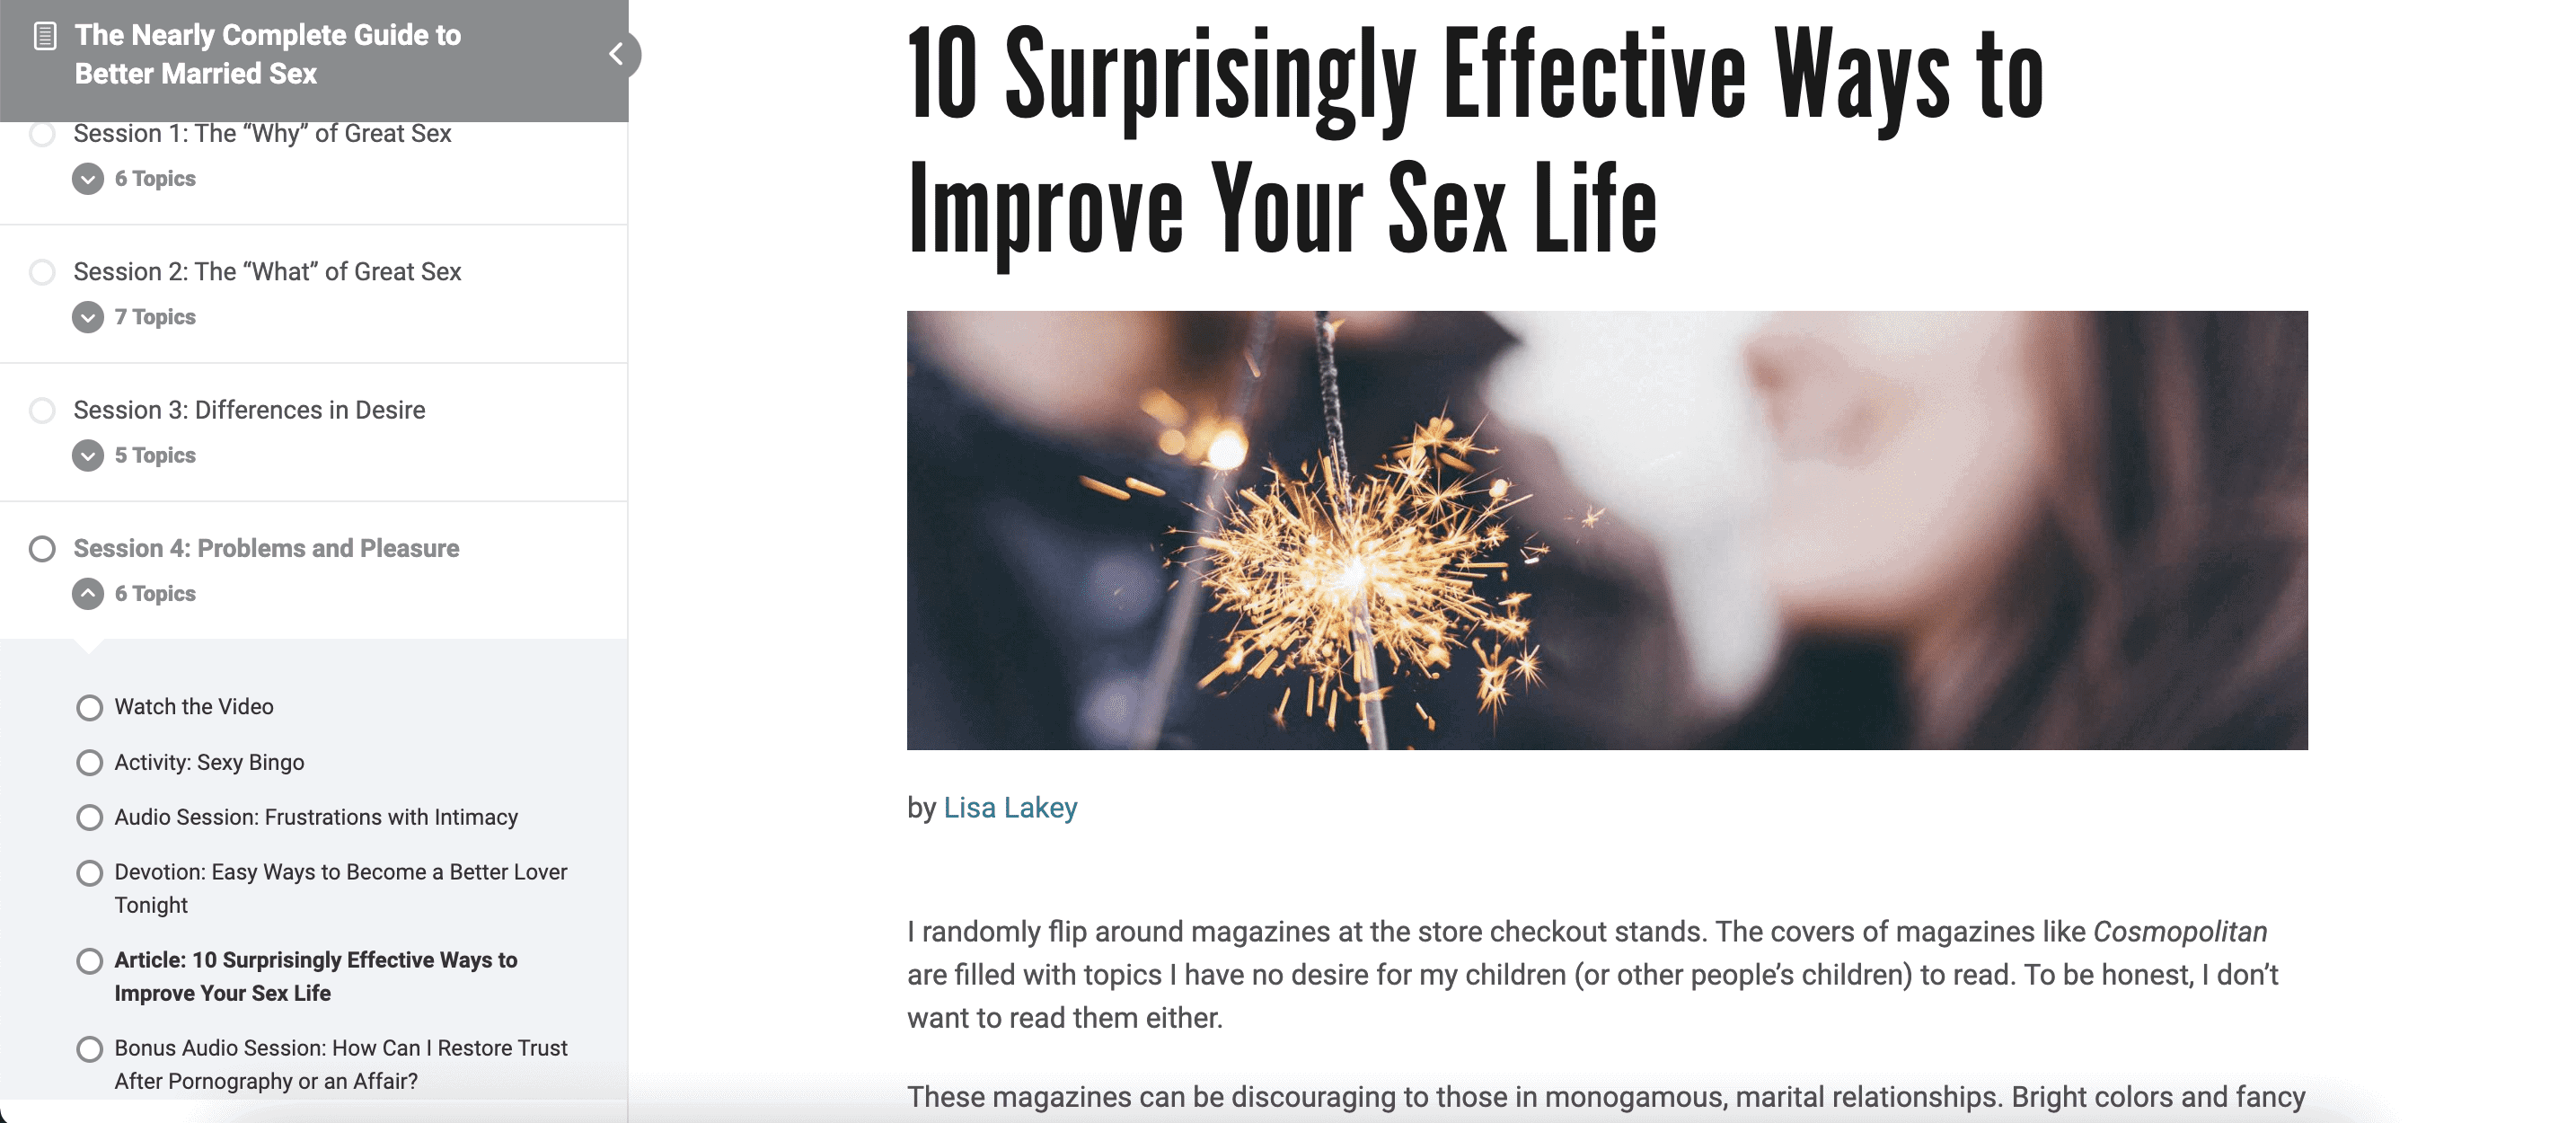 The Nearly Complete Guide to Better Married Sex Online Course pic